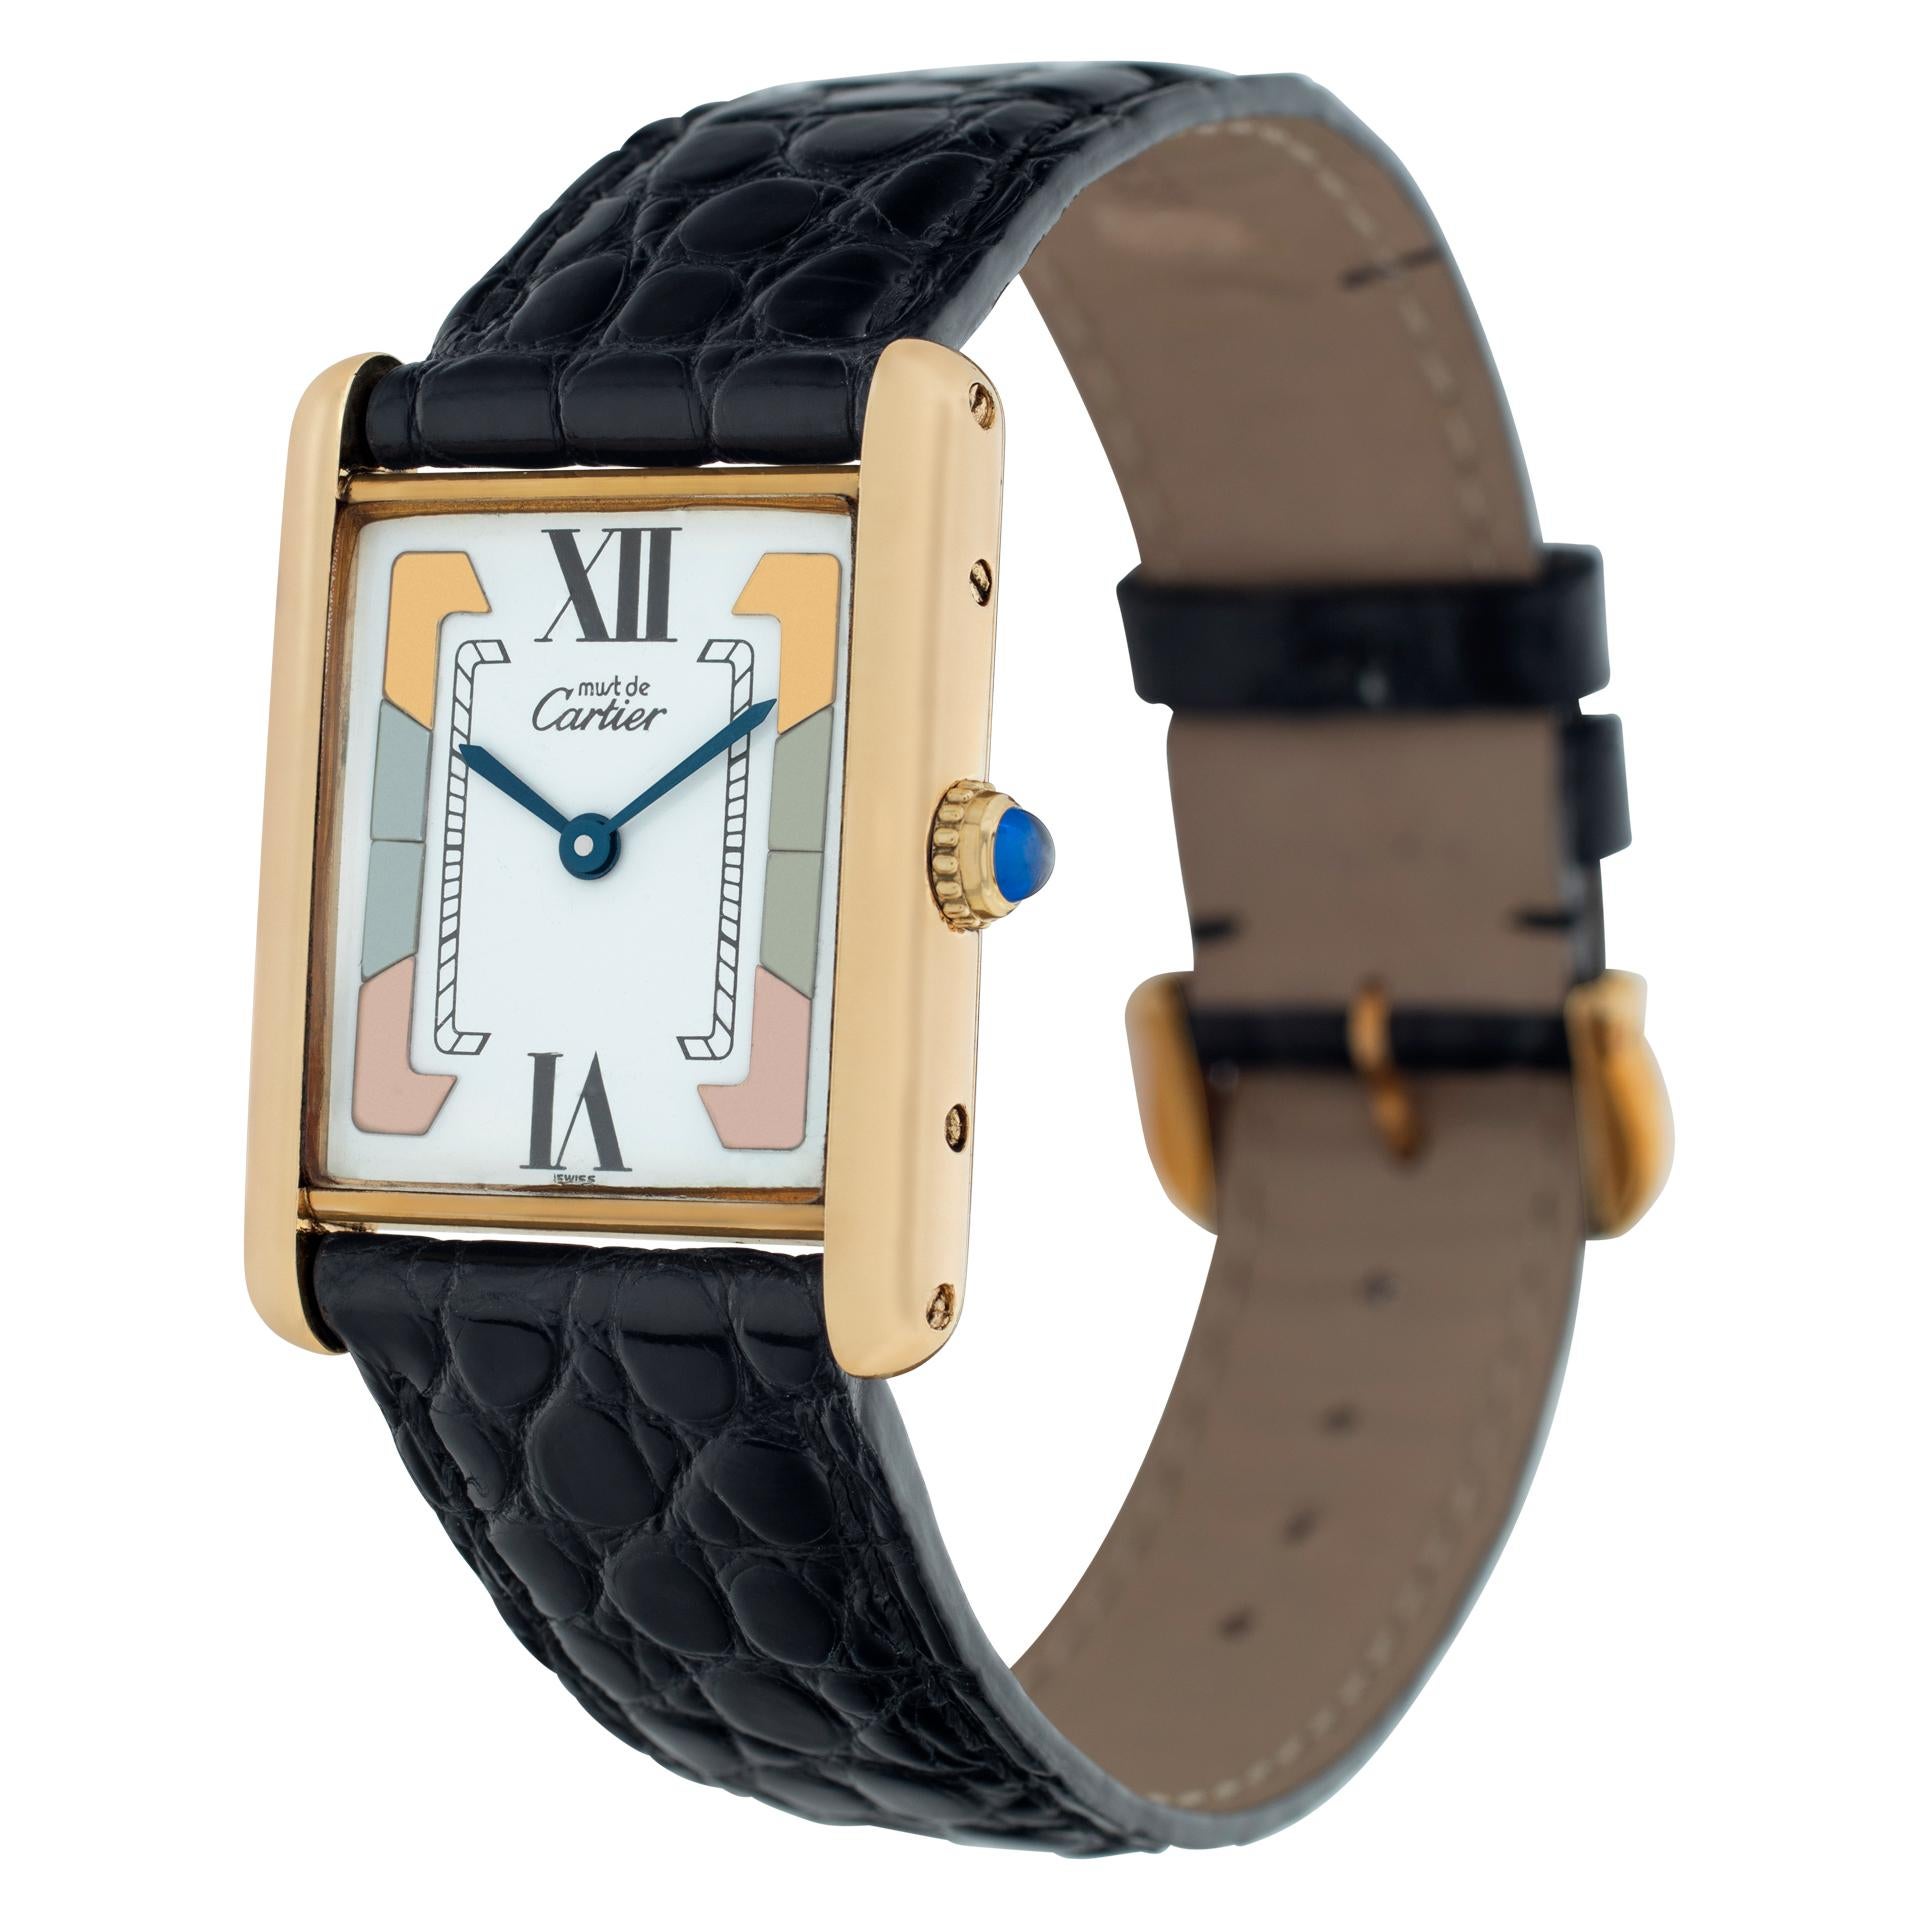 Cartier Tank Louis in 18k yellow gold on a black crocodile strap with 18k tang buckle. White dial with tri-color gold elements. Quartz. 23 mm x 30 mm case size. Circa 2000. Fine Pre-owned Cartier Watch. Certified preowned Classic Cartier Tank watch